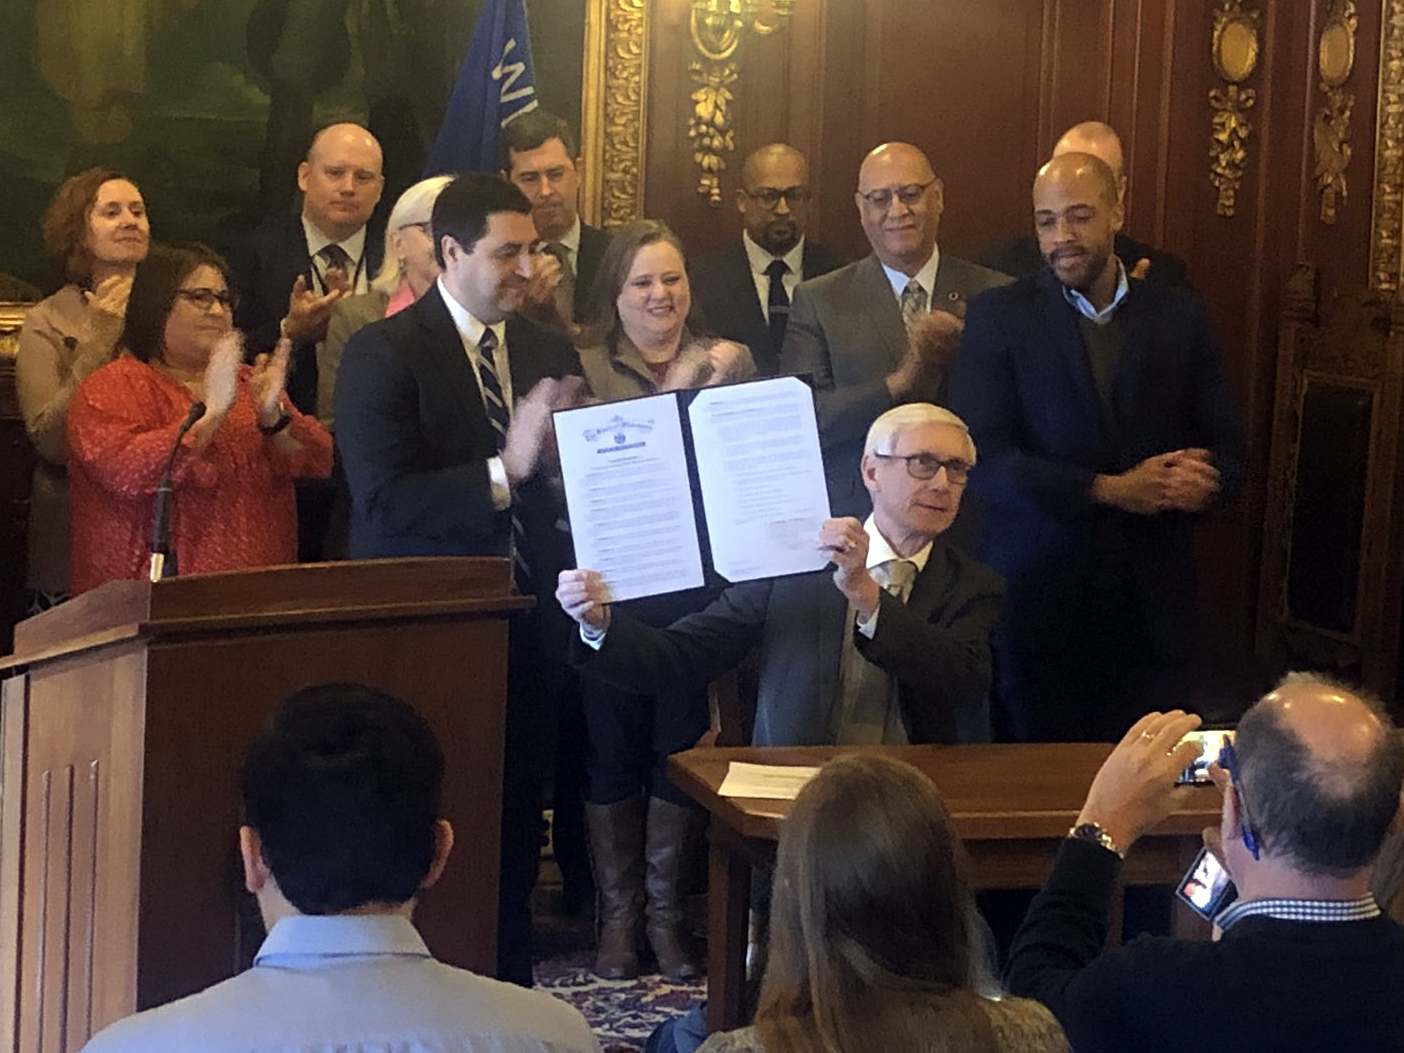 Tony Evers signs an executive order